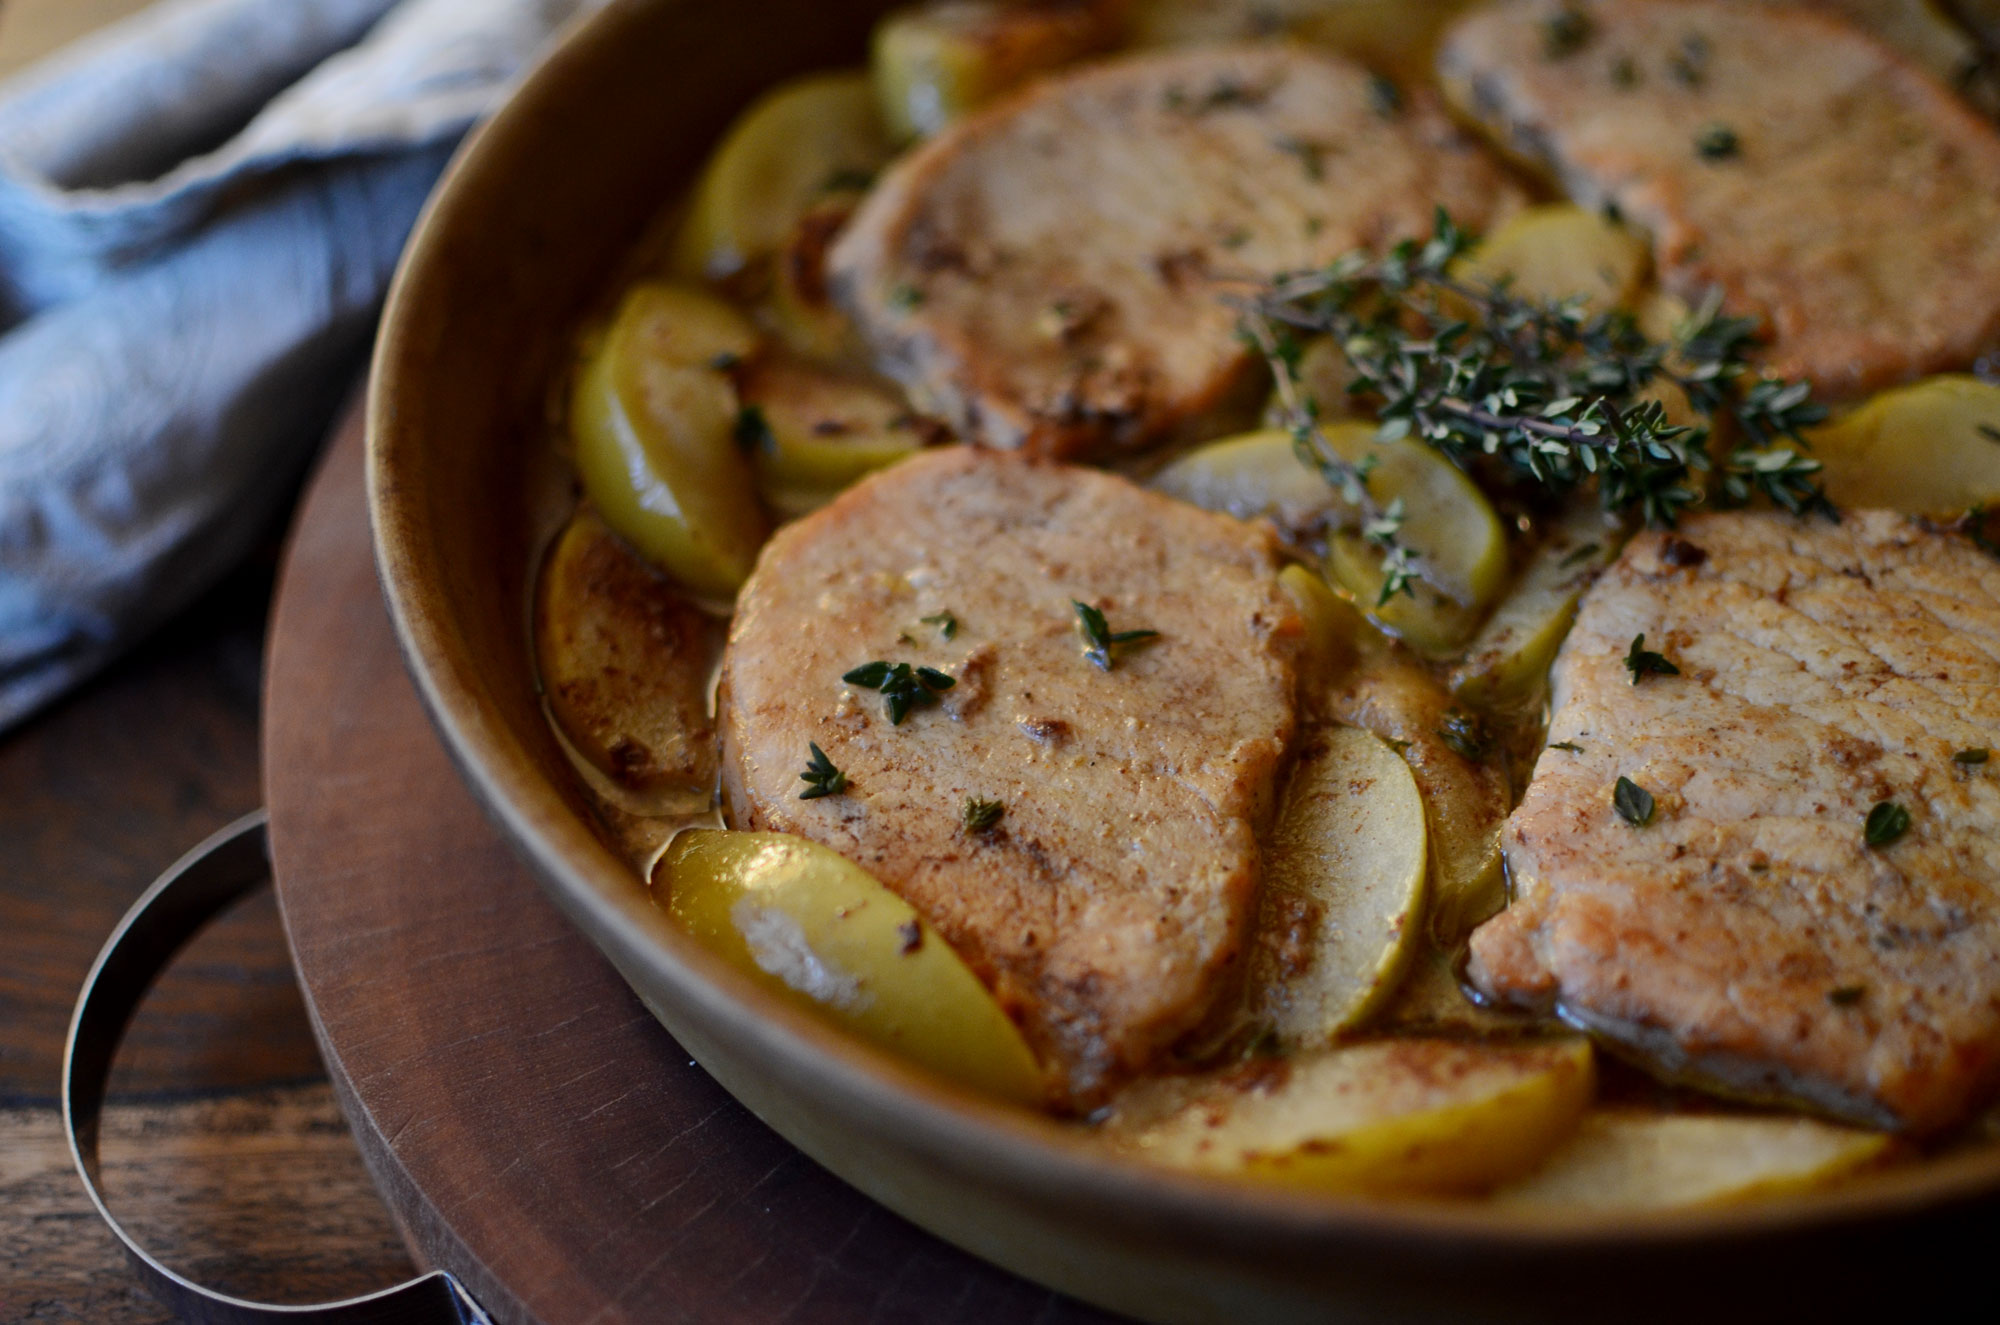 Pork chops and apples